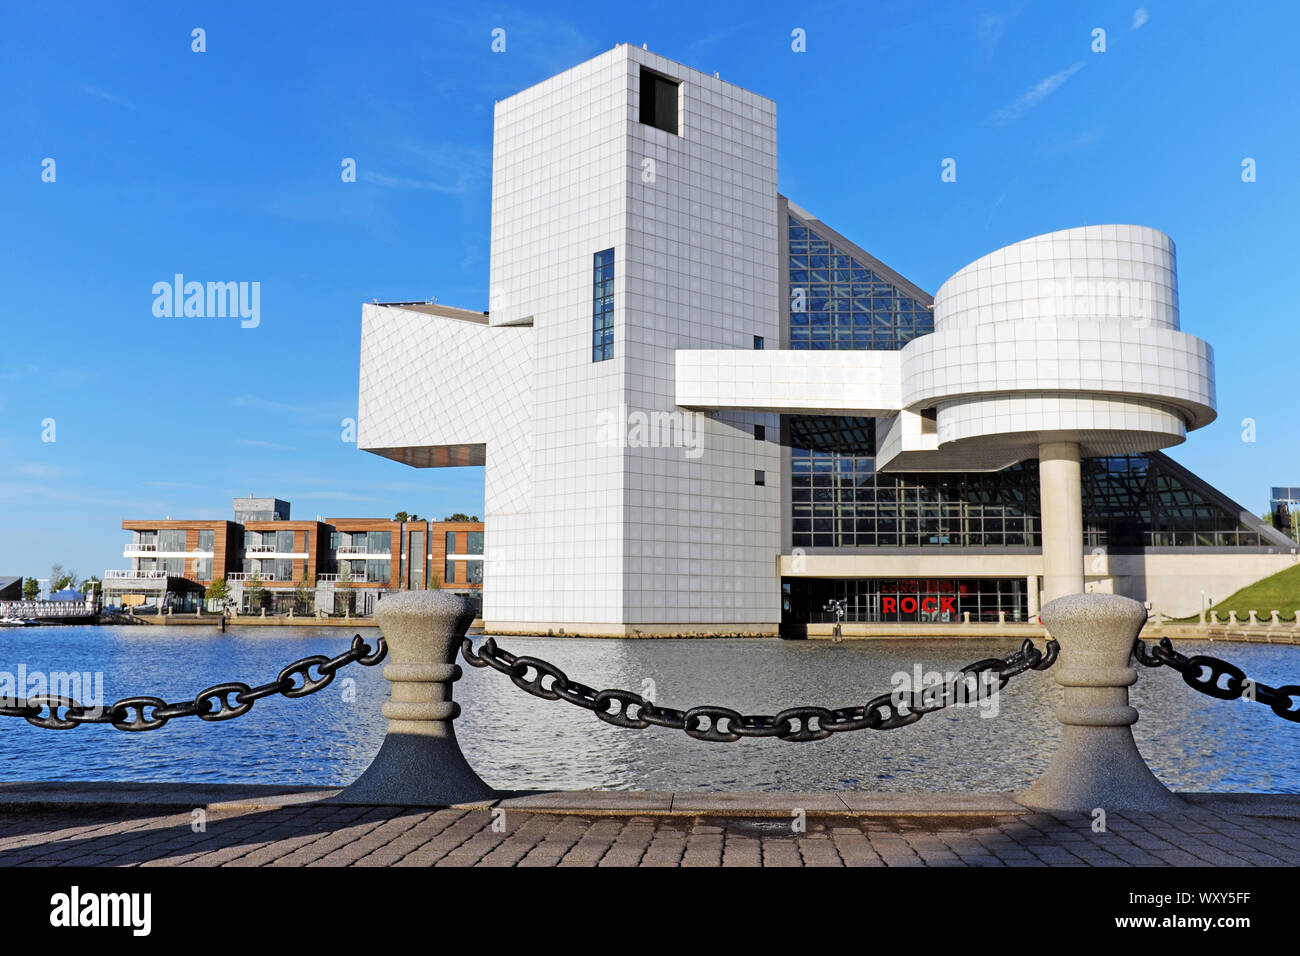 Rock and Roll Hall of Fame and Museum im Northcoast Harbour von Cleveland, Ohio, USA. Stockfoto